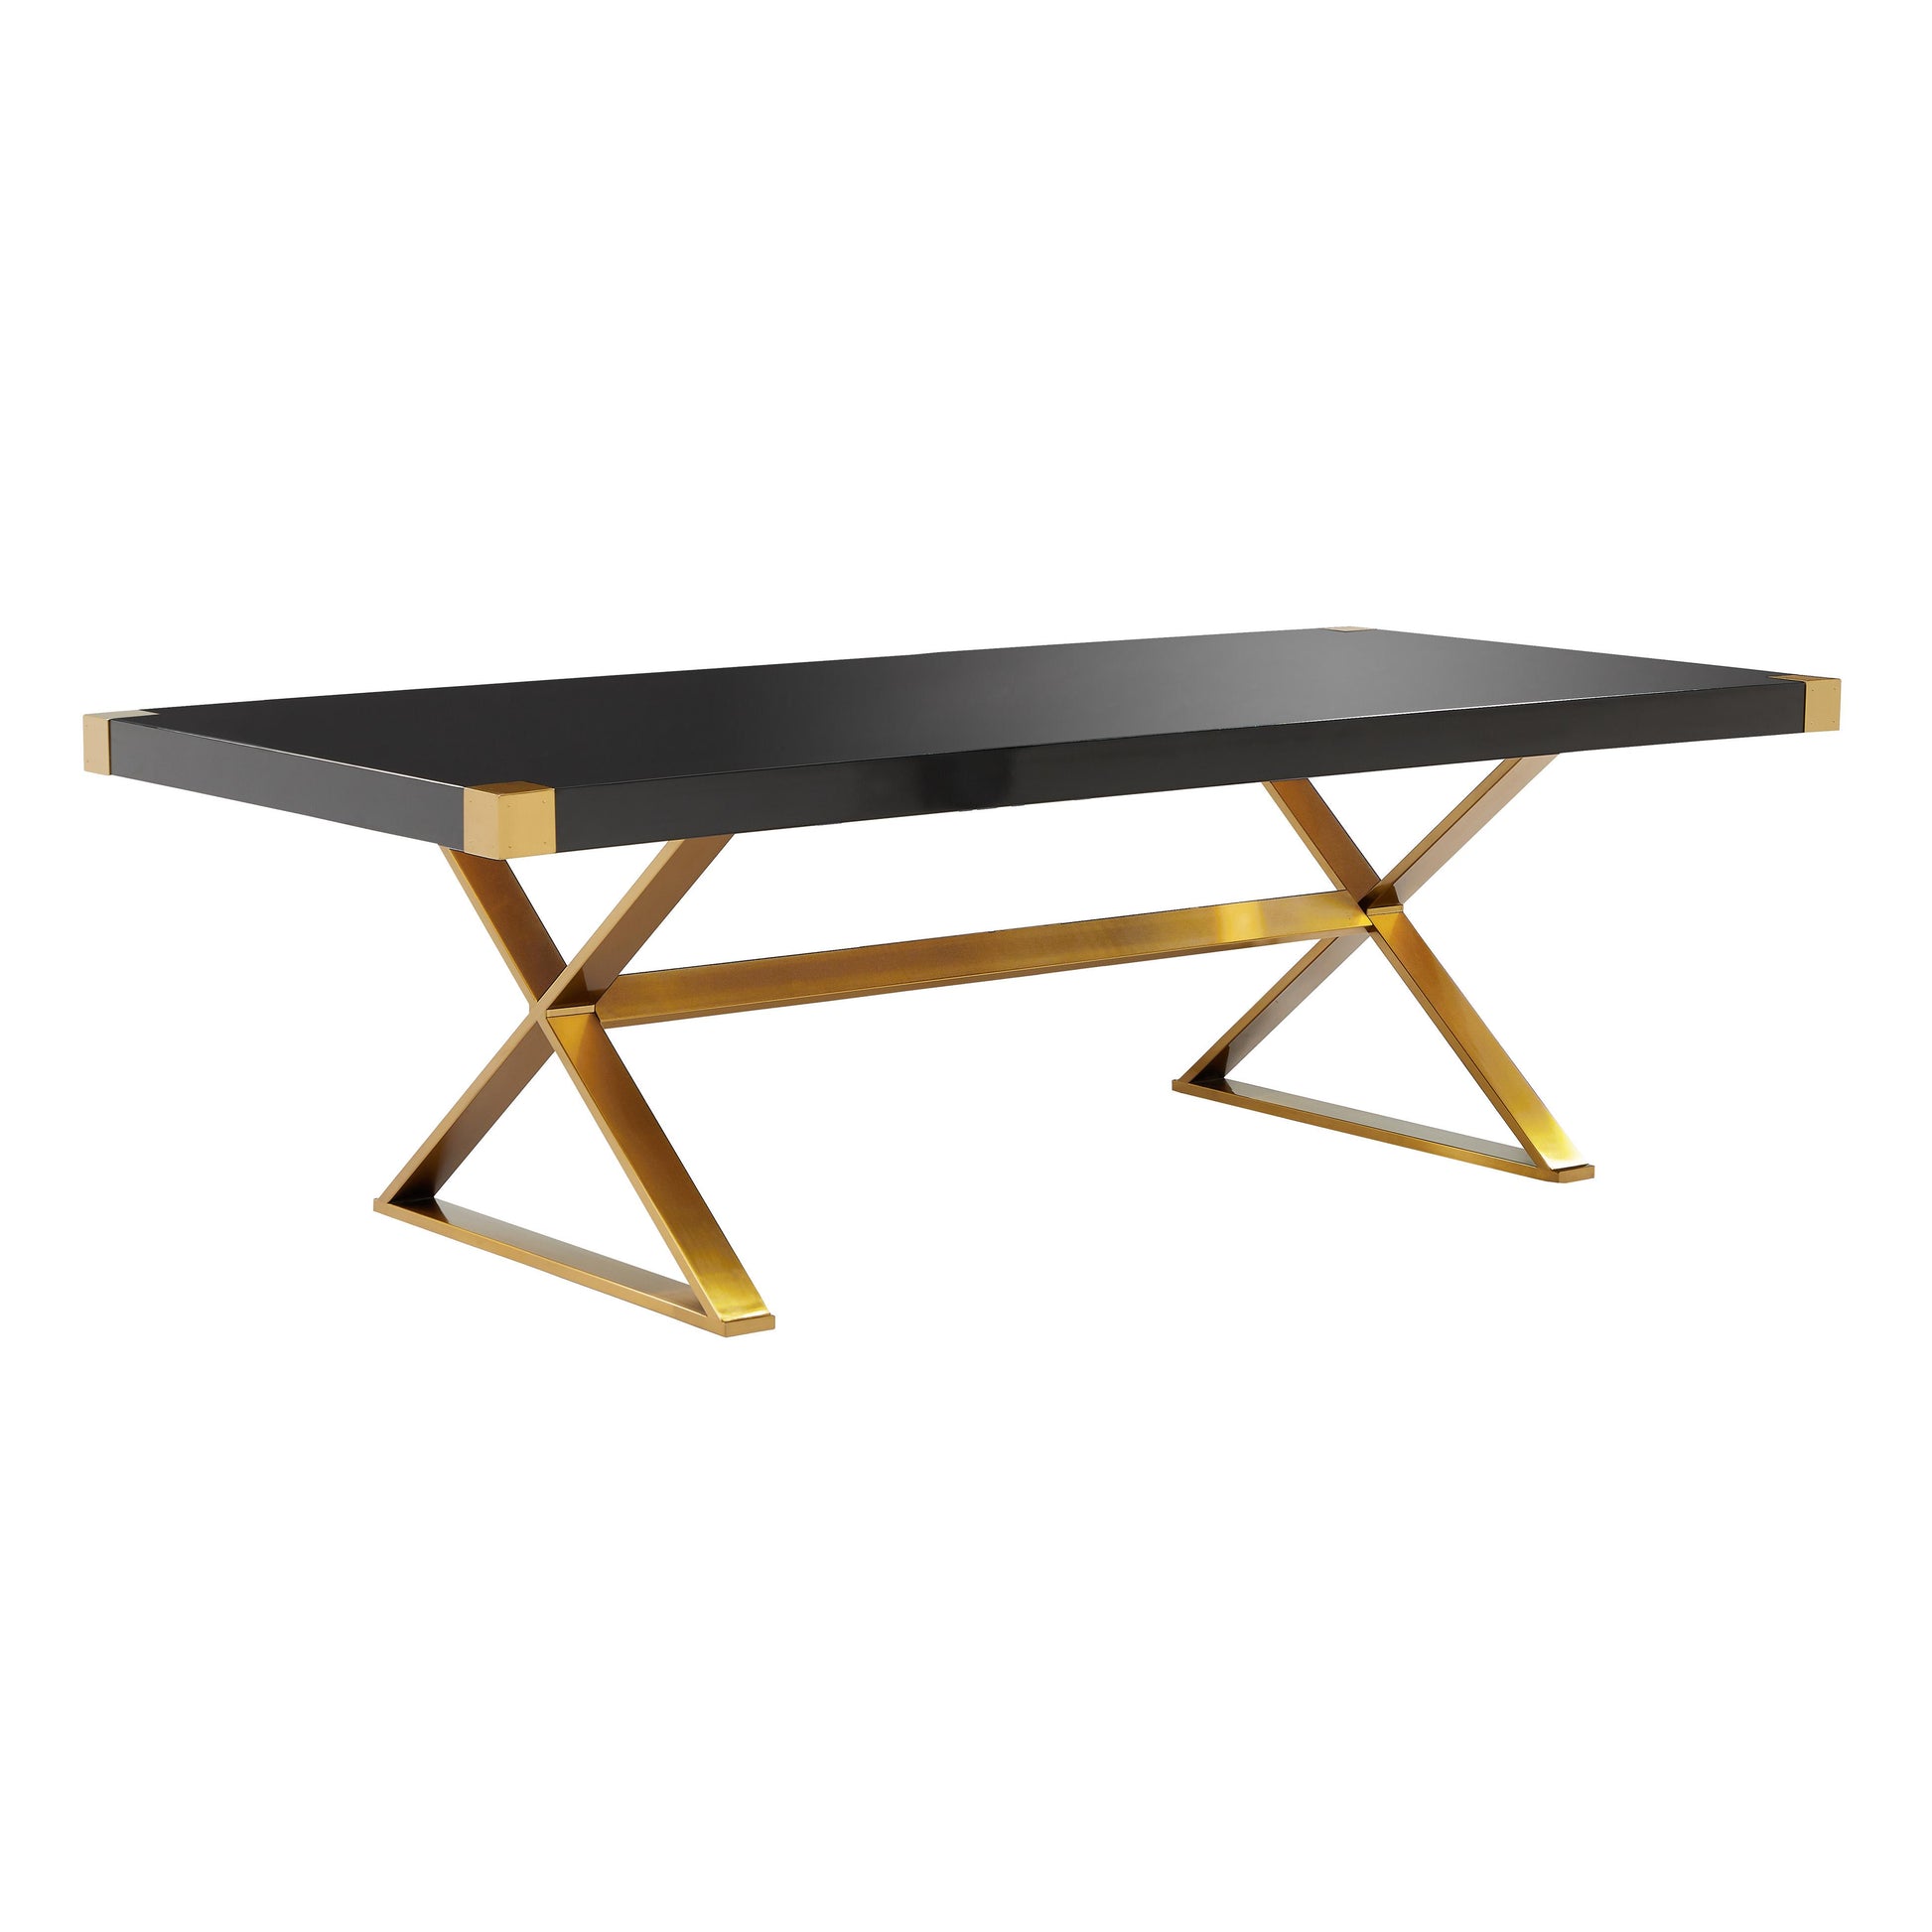 Tov Furniture Adeline Black Lacquer Dining Table